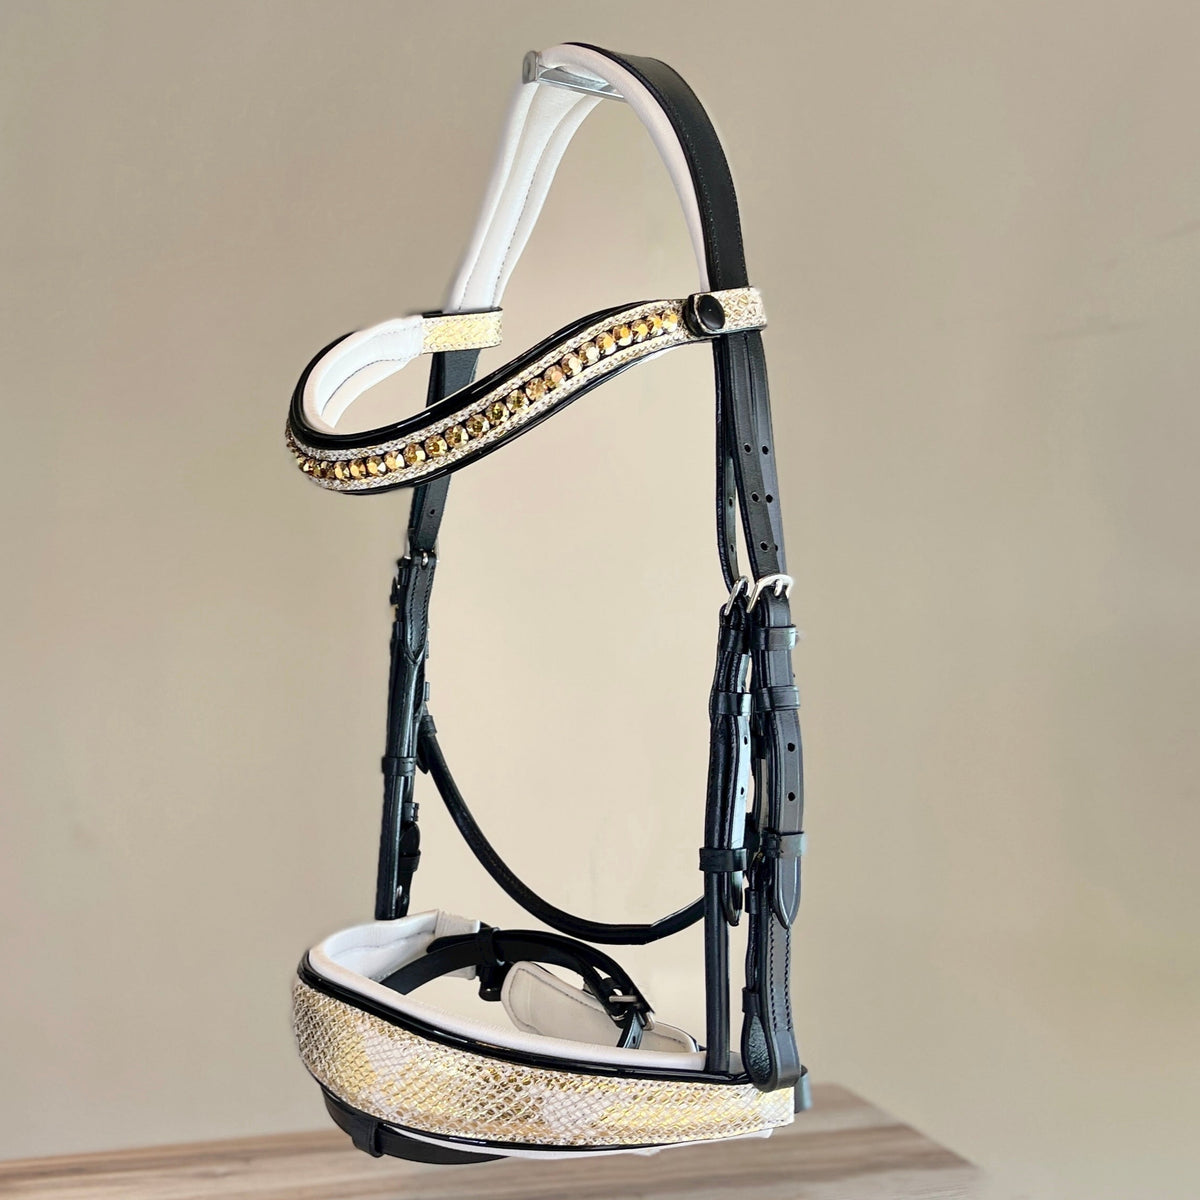 The Vegas Snaffle Bridle